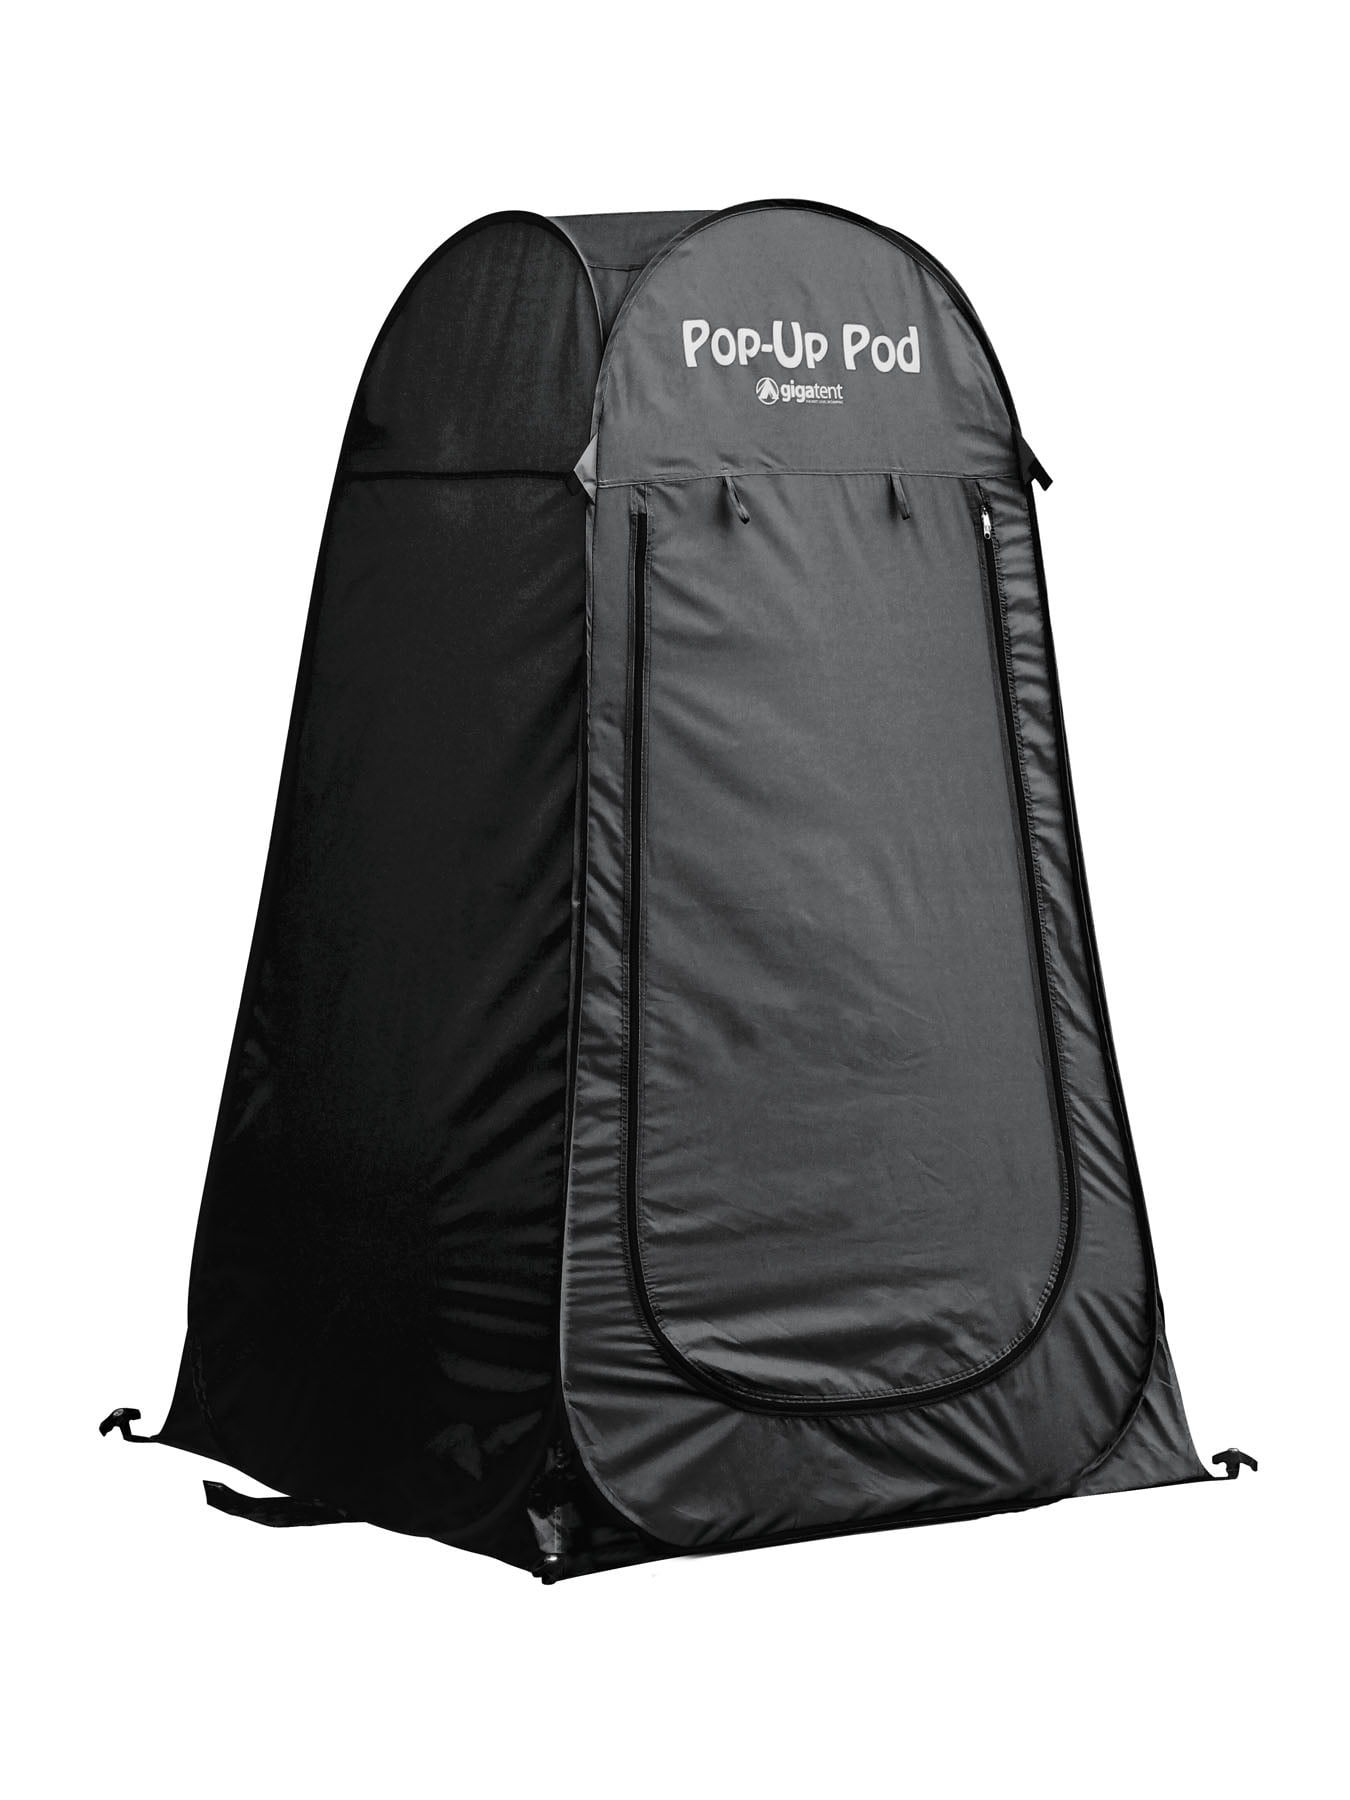 GigaTent Pop Up Pod Portable Shower Station And Privacy Room Pop Up Camping Tent 